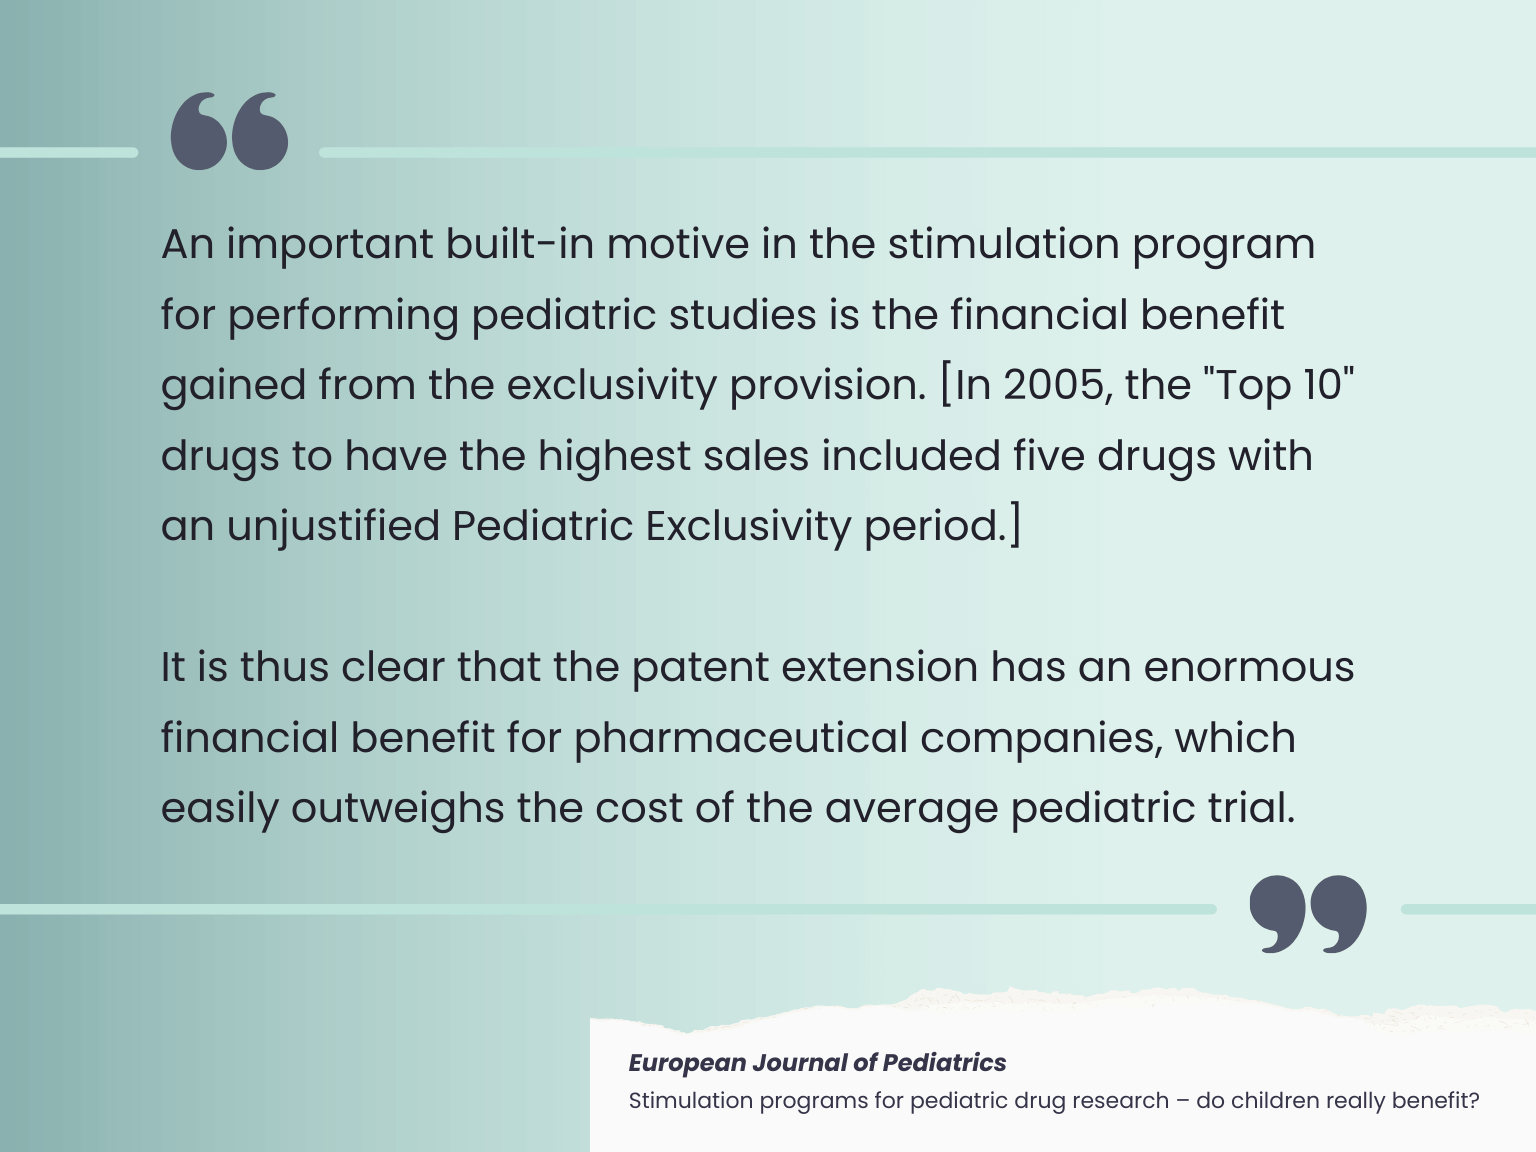 Quote from an article in European Journal of Pediatrics: An important built-in motive in the stimulation program for performing pediatric studies is the financial benefit gained from the exclusivity provision. [In 2005, the "Top 10" drugs to have the highest sales included five drugs with an unjustified Pediatric Exclusivity period.]  It is thus clear that the patent extension has an enormous financial benefit for pharmaceutical companies, which easily outweighs the cost of the average pediatric trials.